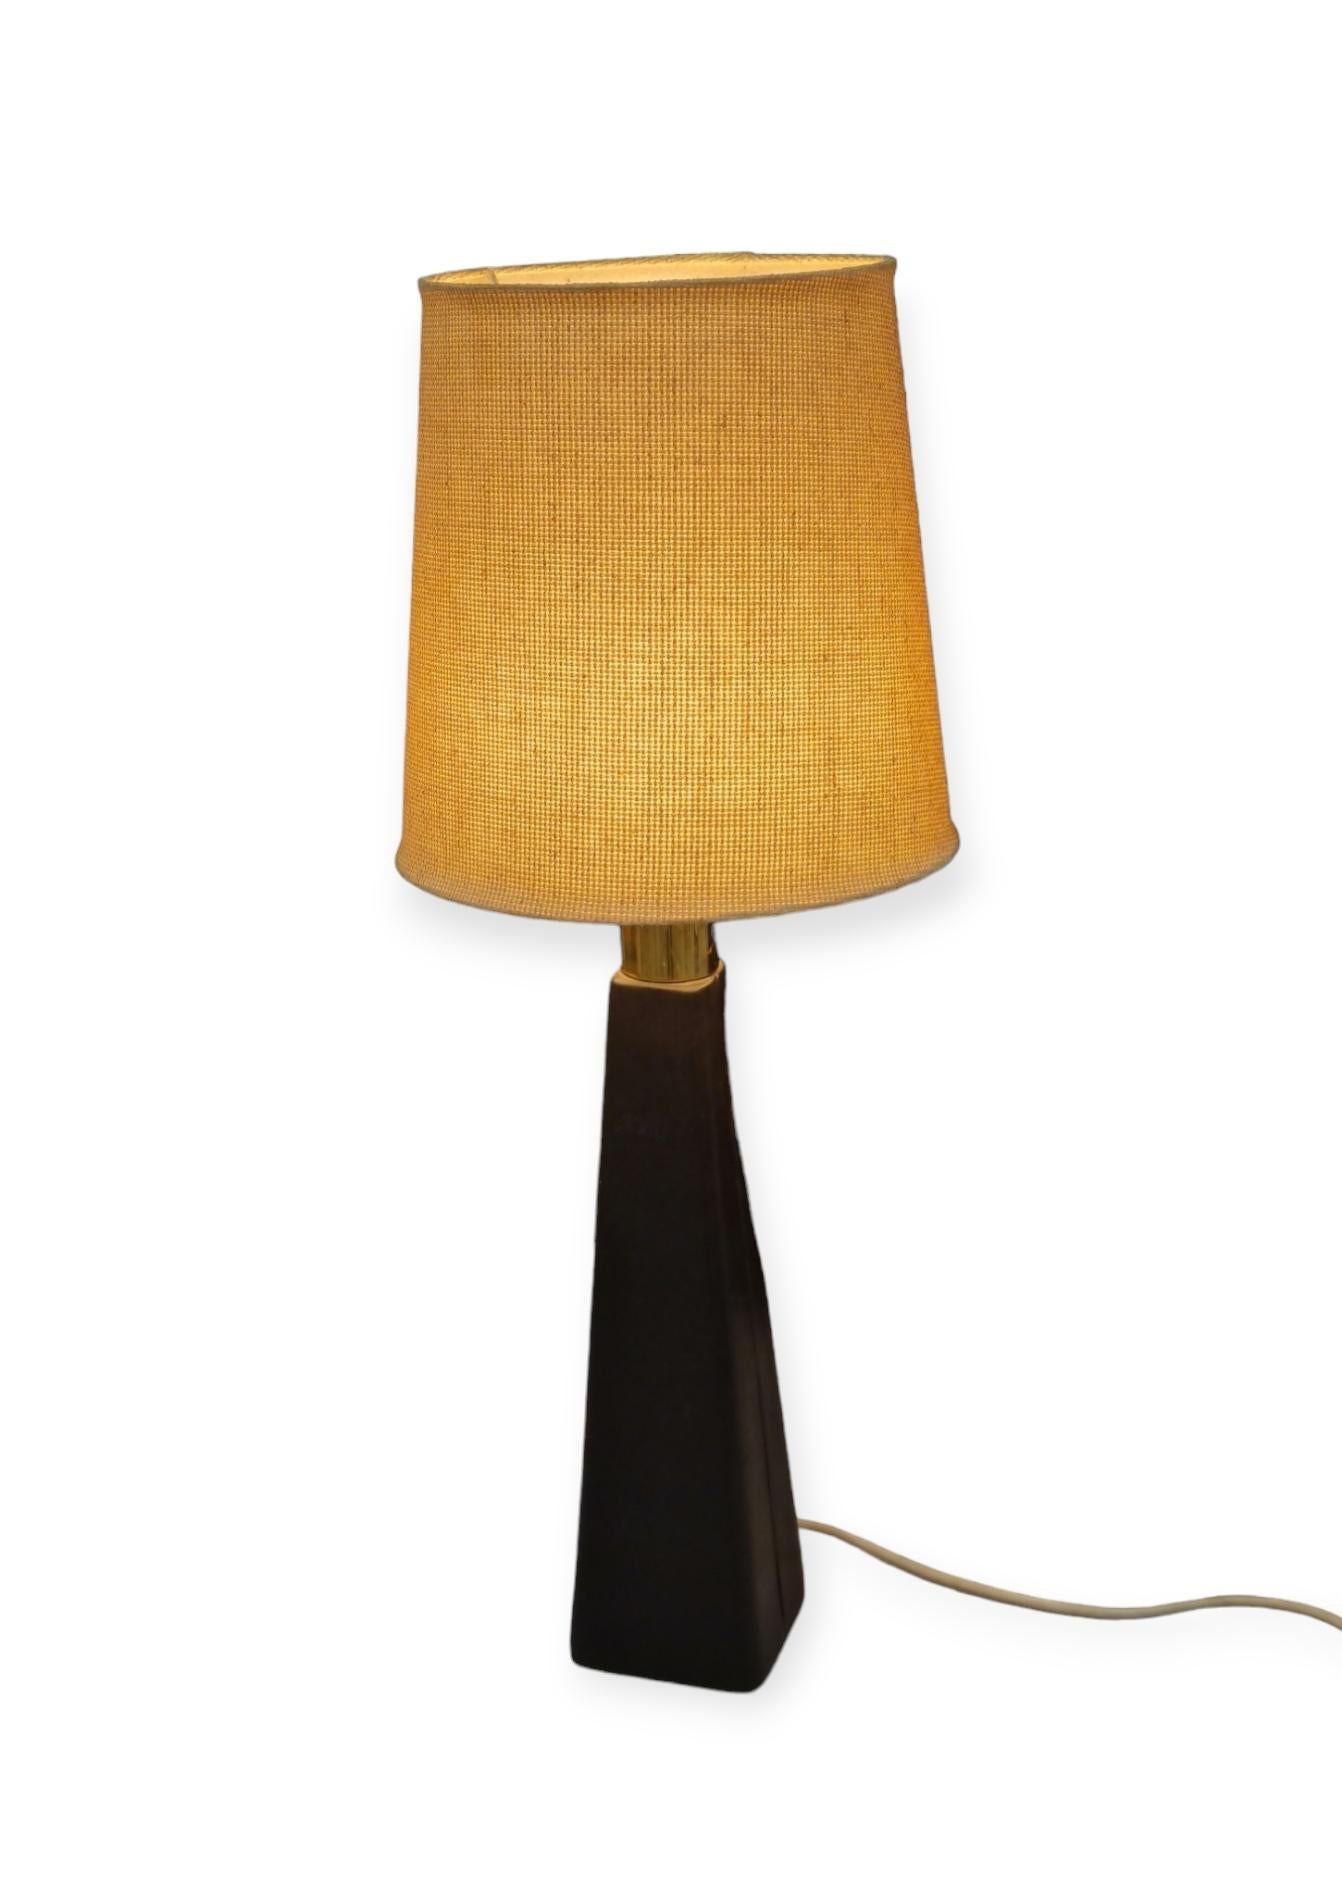 Rare and special Lisa Johansson-Pape table lamp model 46-186 designed for the University of Helsinki. This lamp is much harder to come by than some of the other Pape models and certainly stands out. The lamp consists of a wooden base covered in